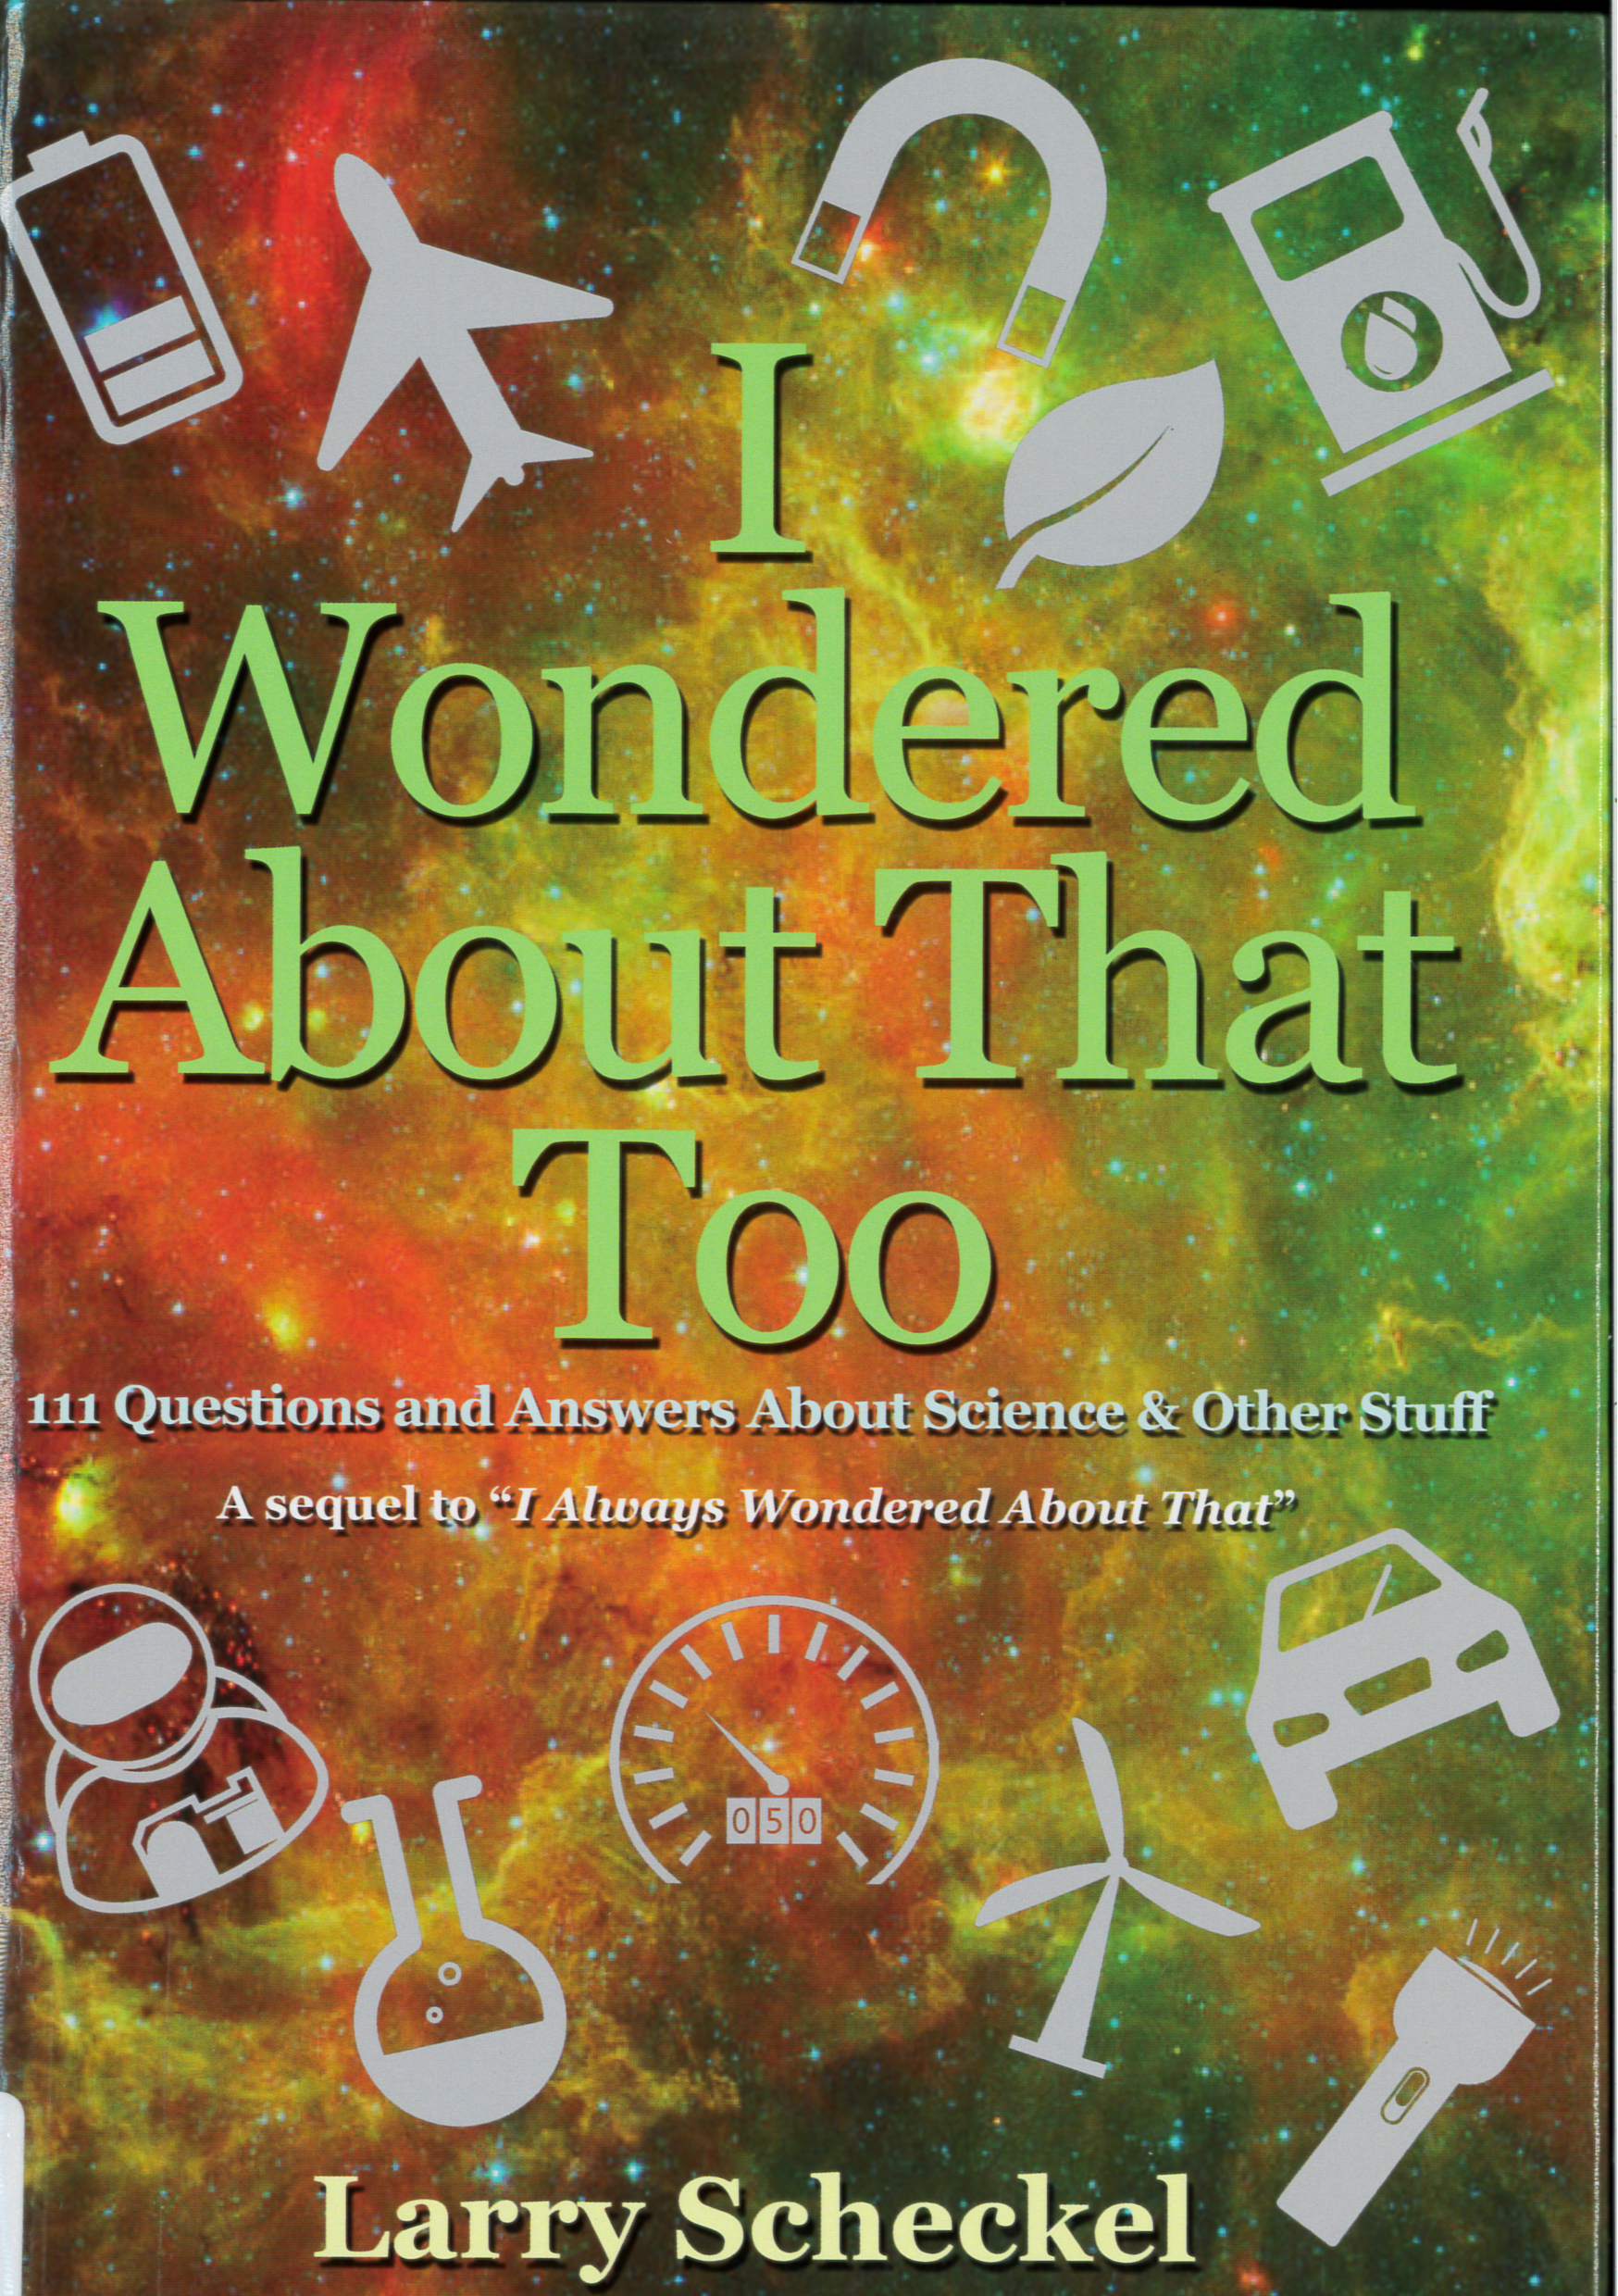 I wondered about that too : 111 questions and answers about science and other stuff /